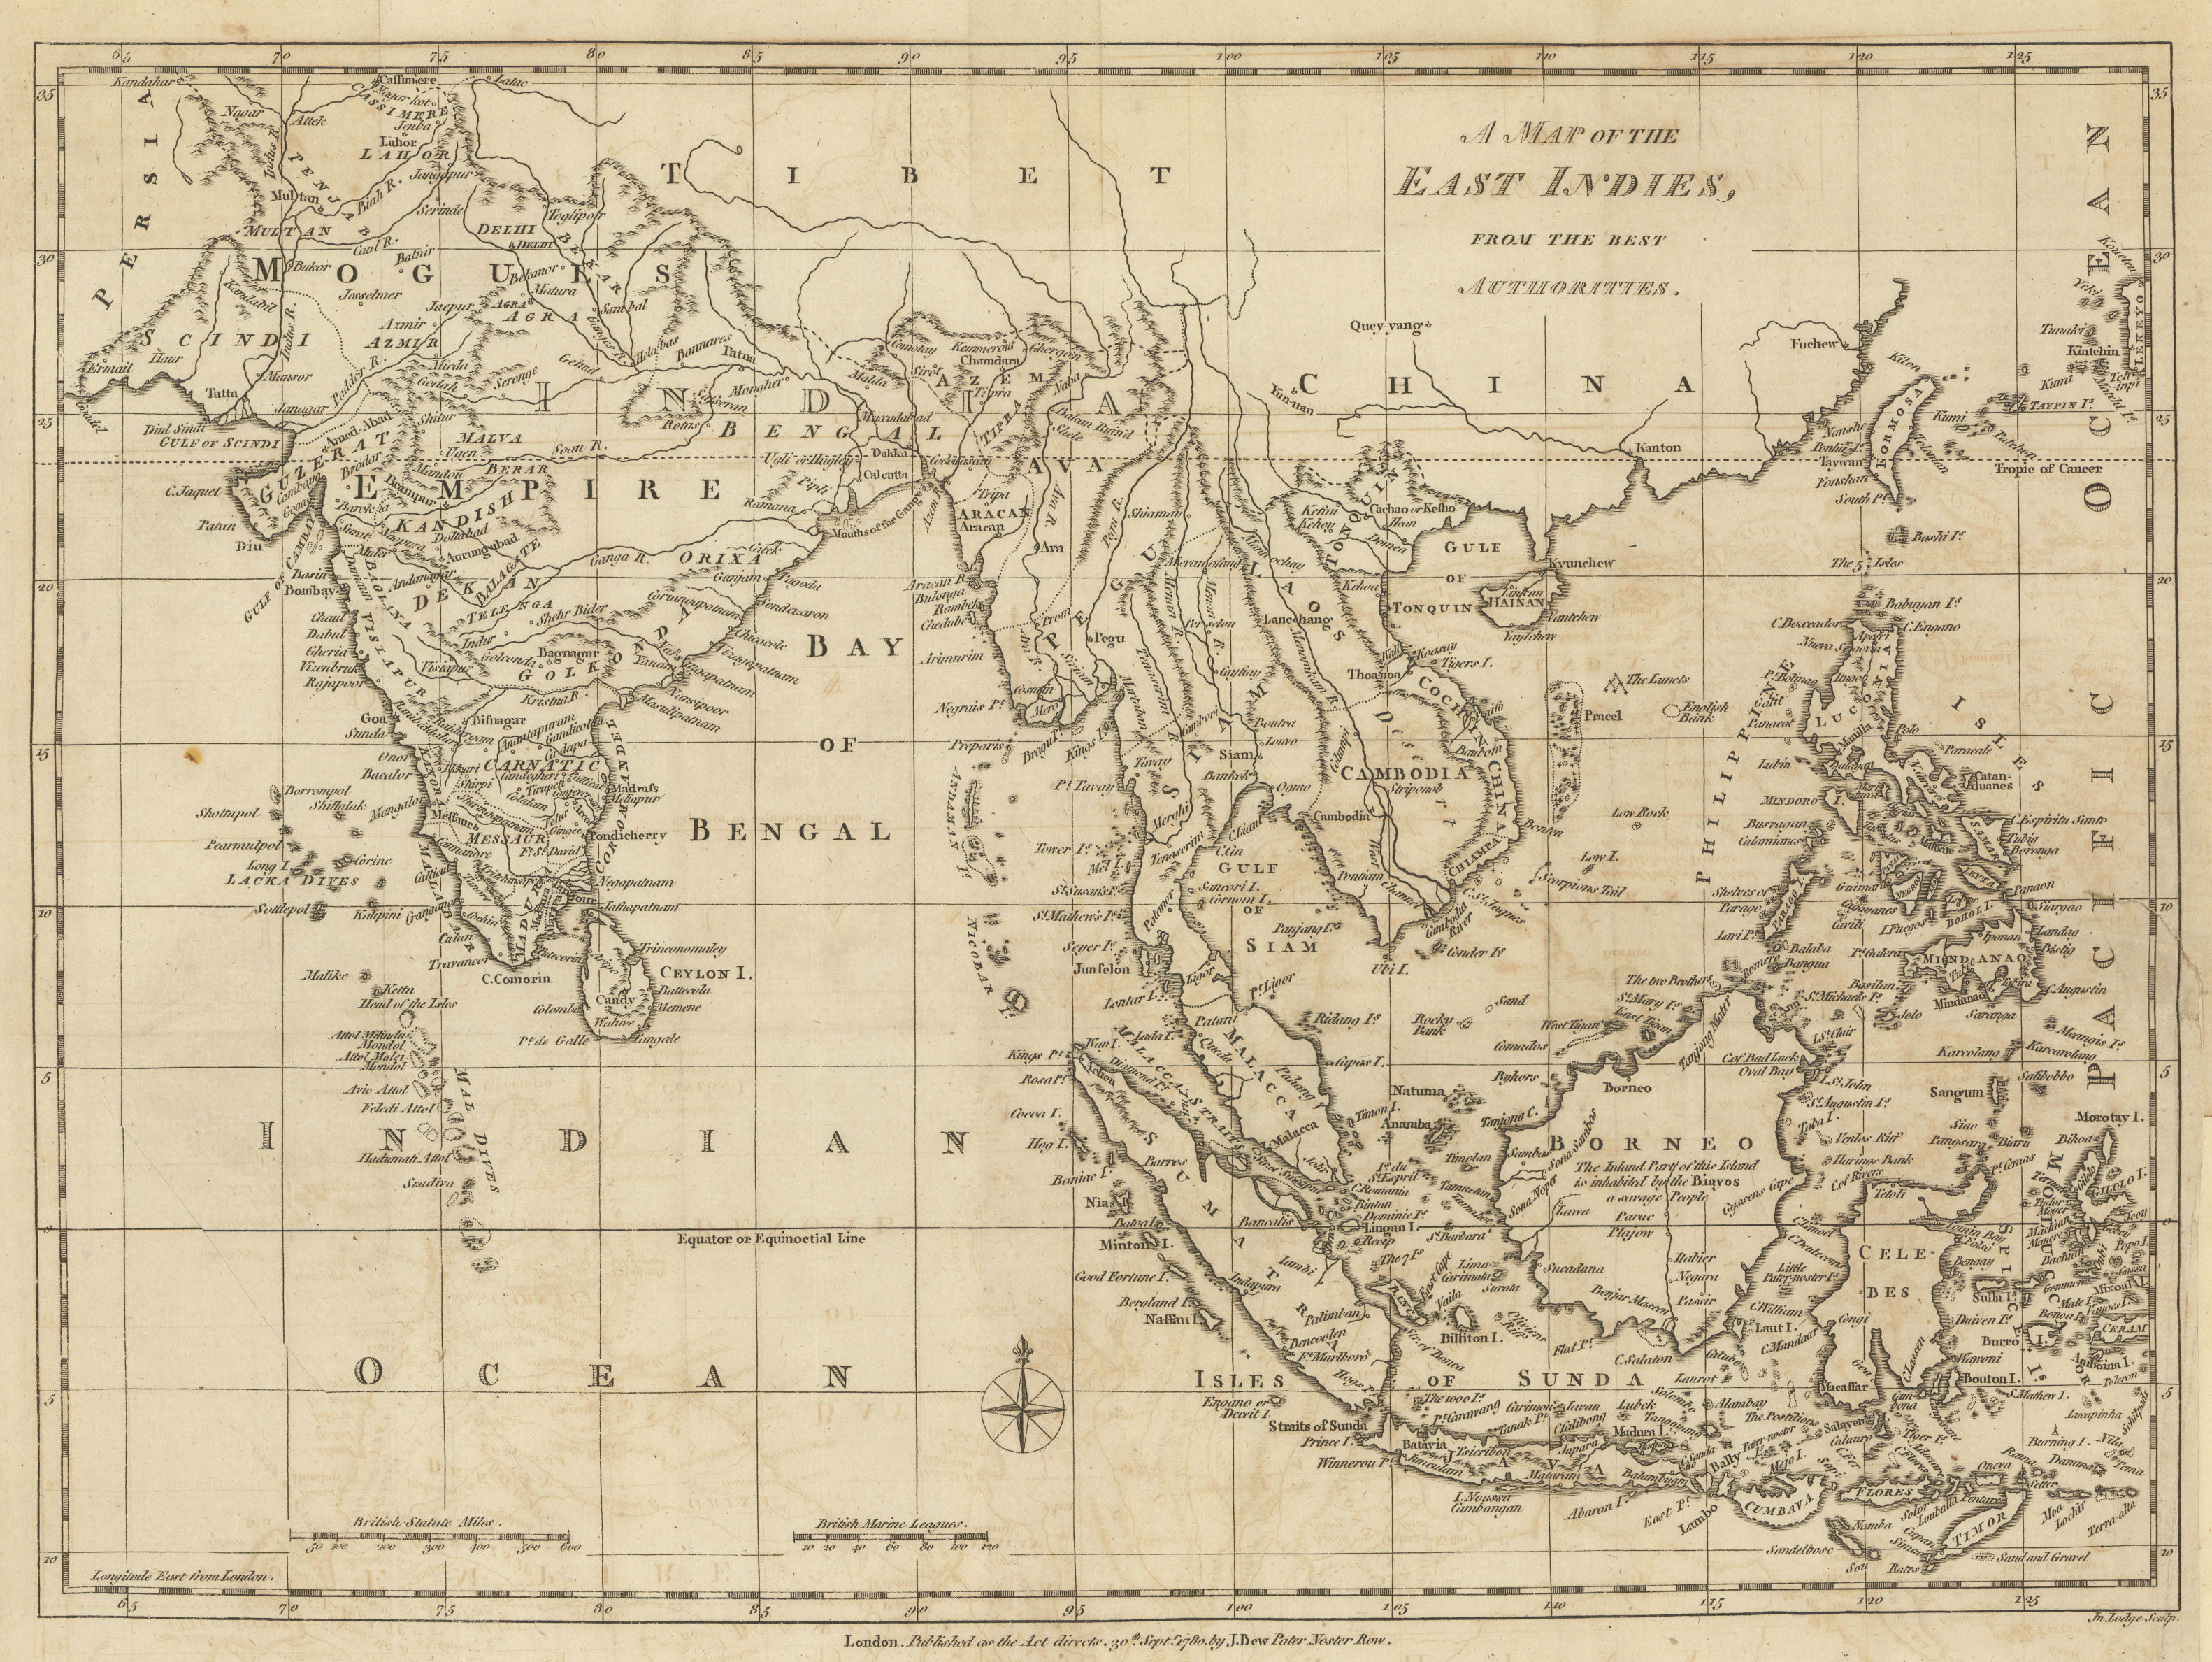 A Map of the East Indies, from the Best Authorities, by John Lodge 1780